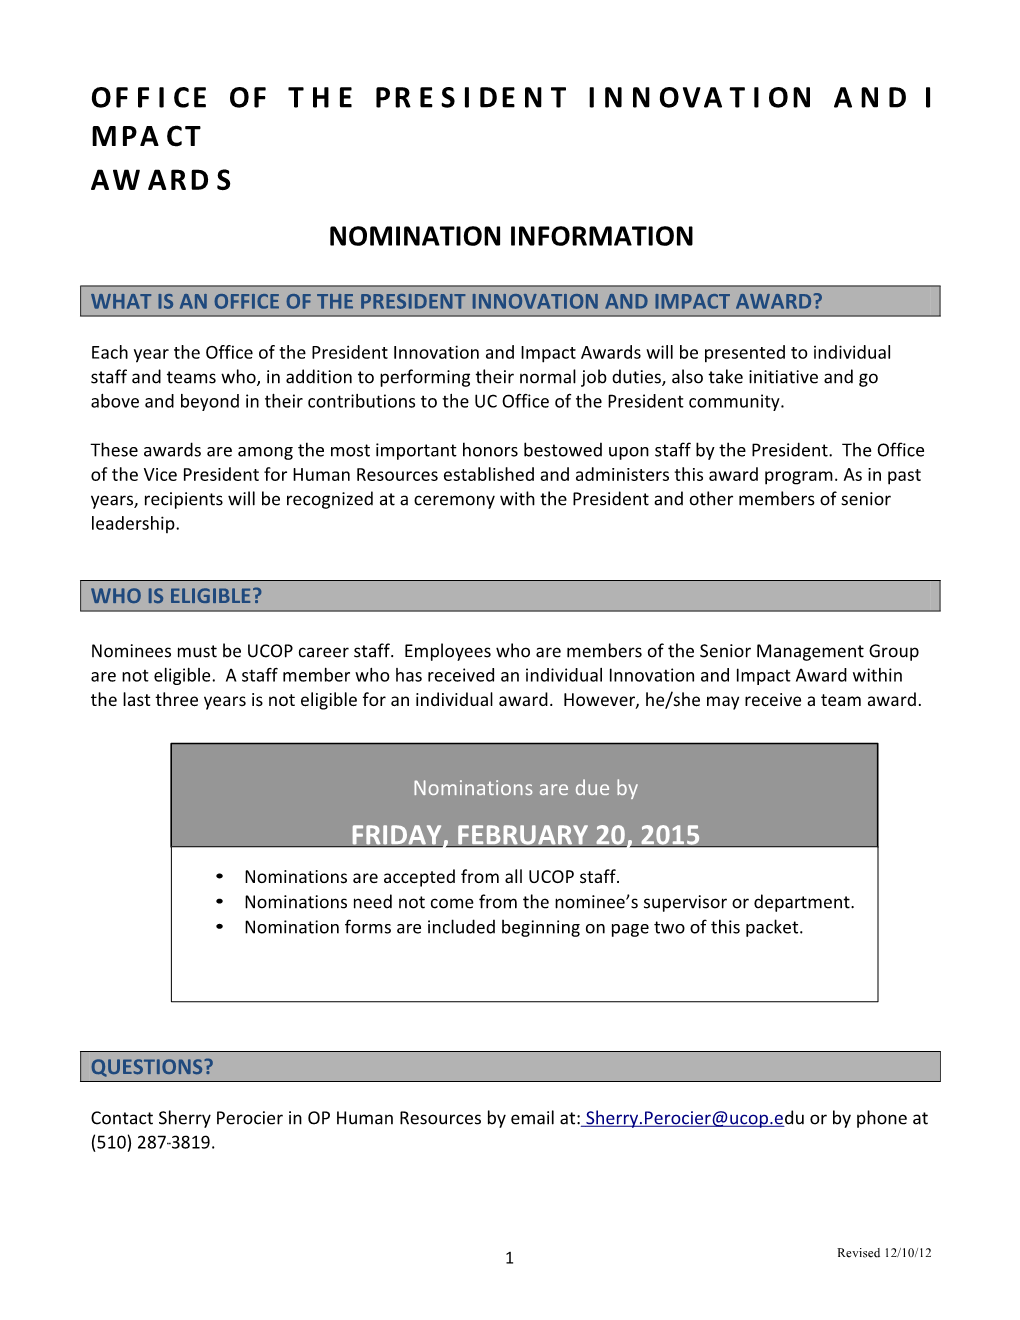 What Is an Office of the President Innovation and Impact Award?